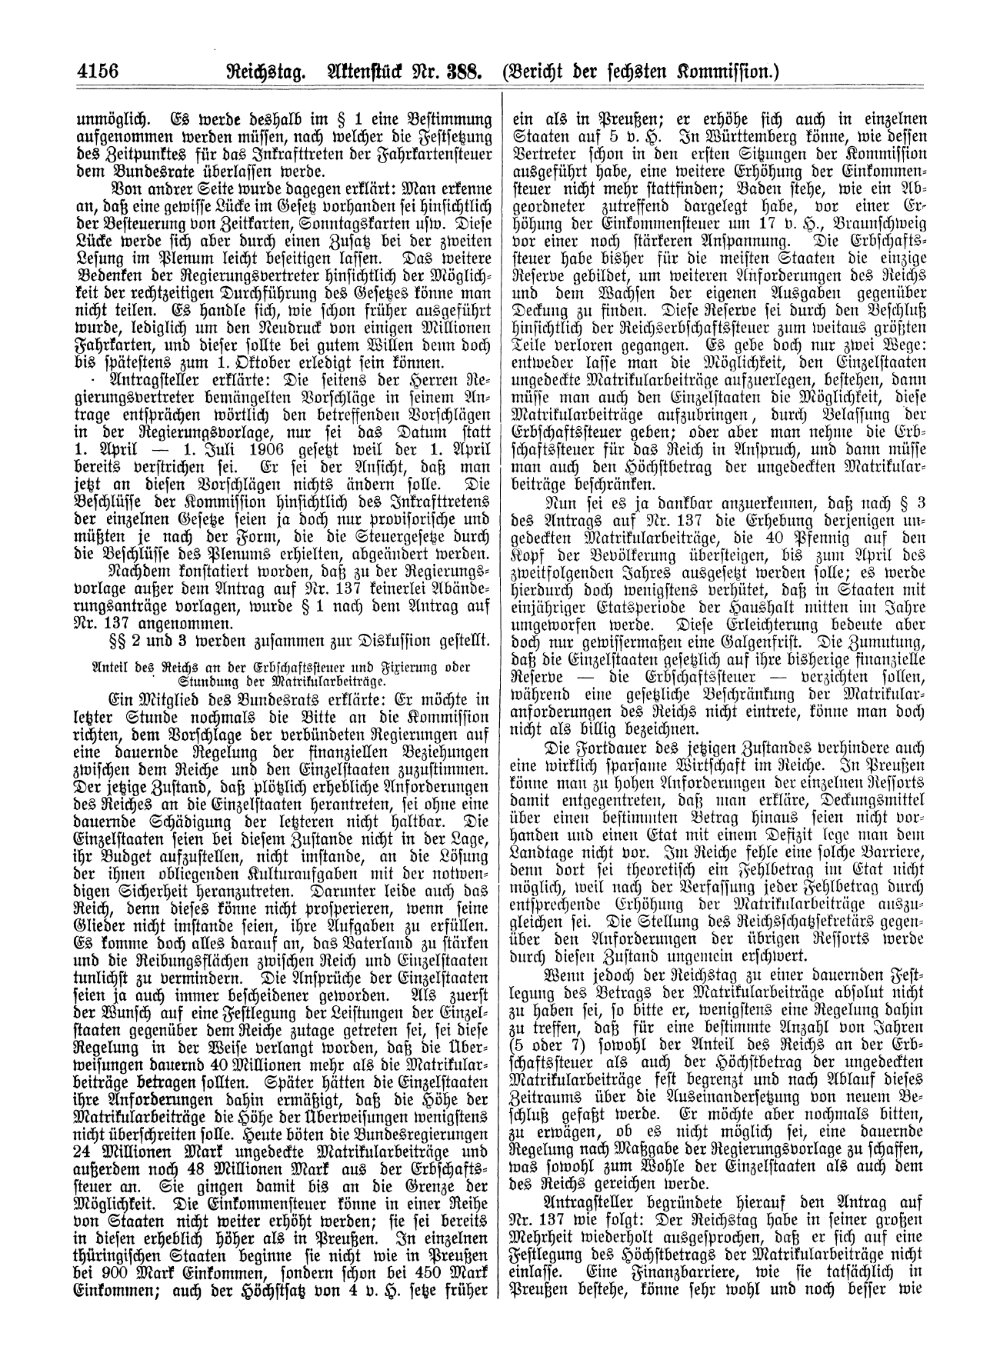 Scan of page 4156